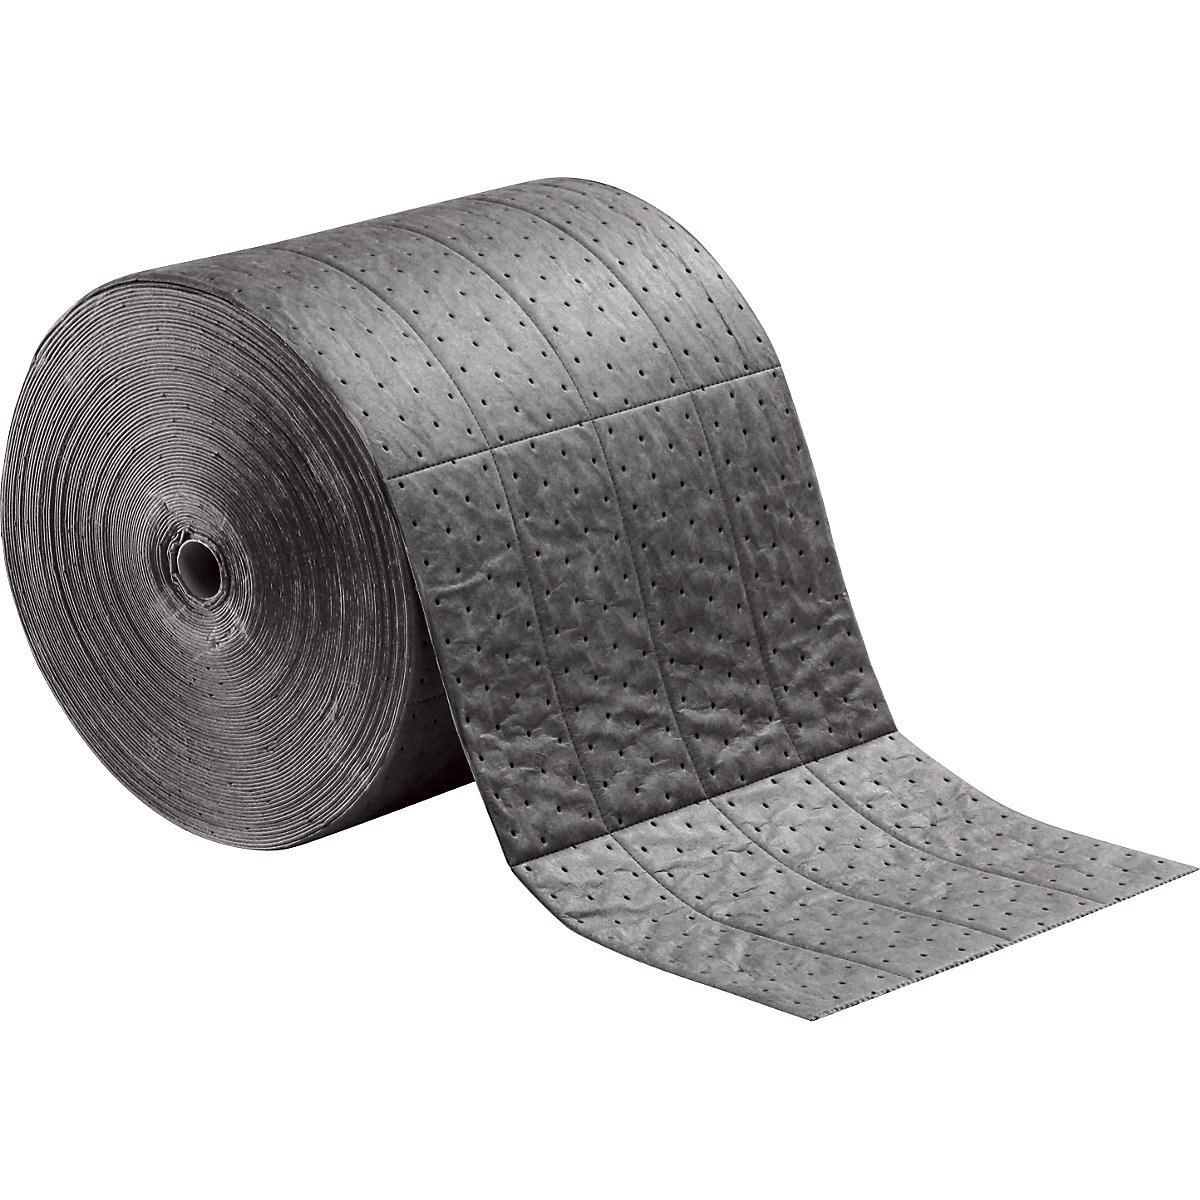 RIP-&-FIT® universal absorbent sheeting roll - PIG